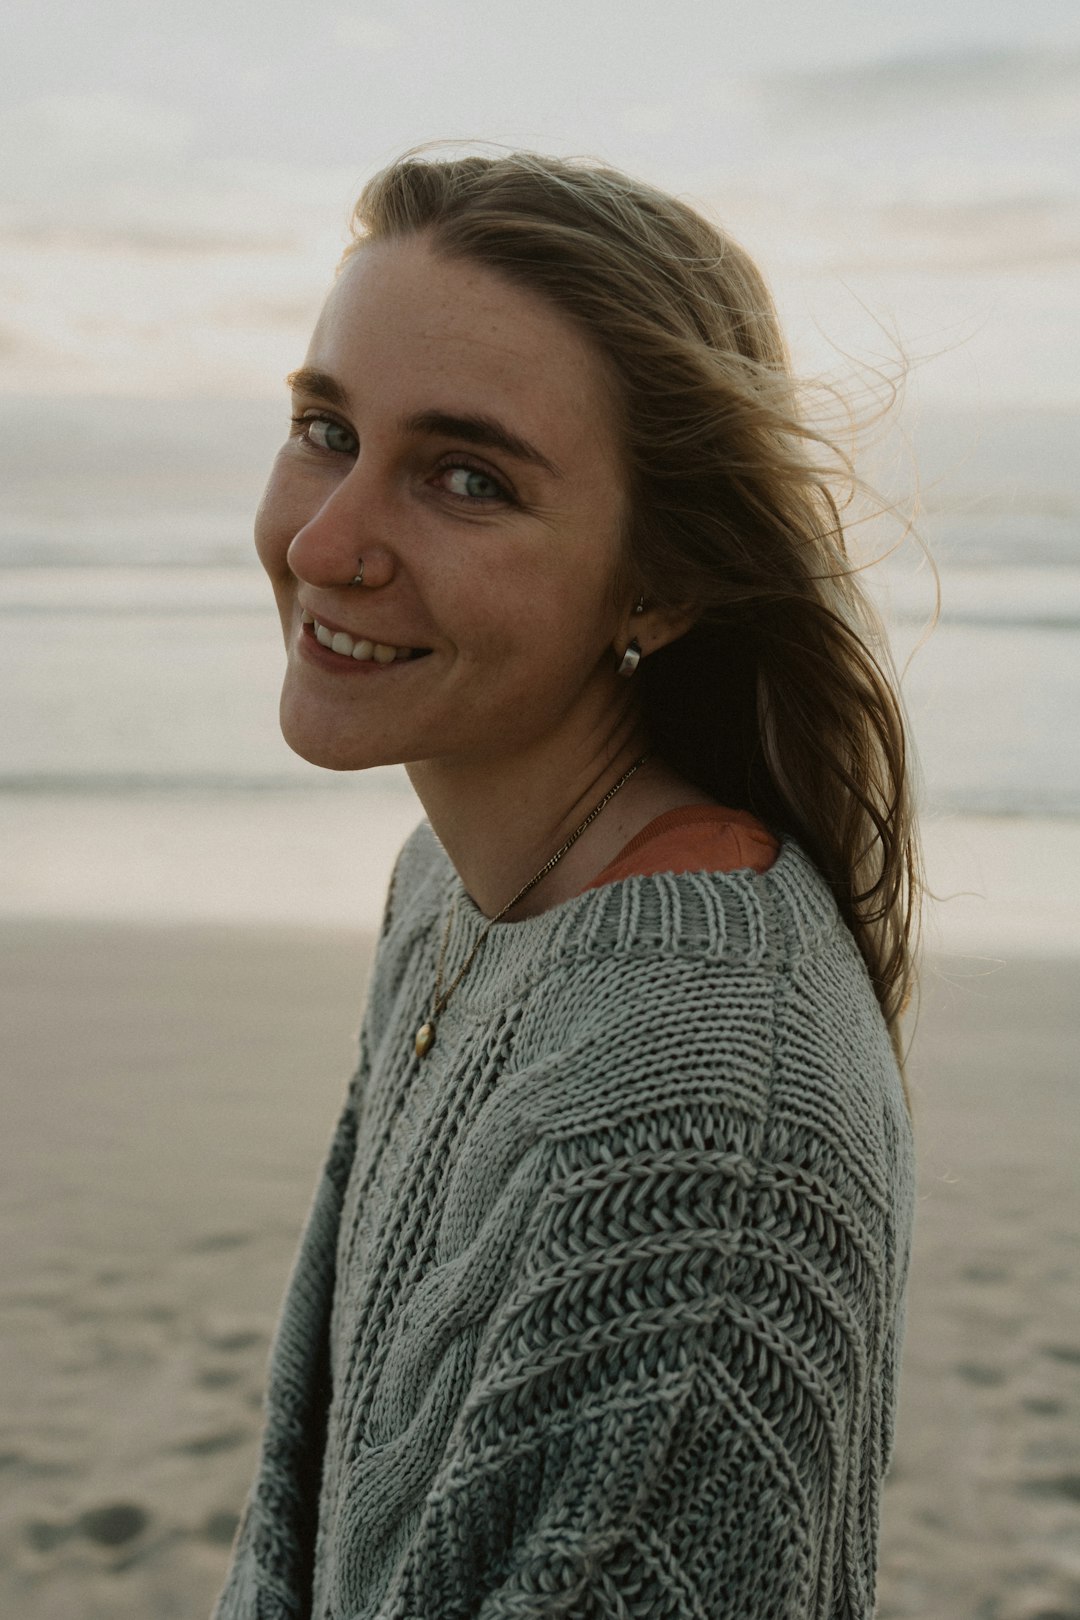 woman in gray knit sweater smiling